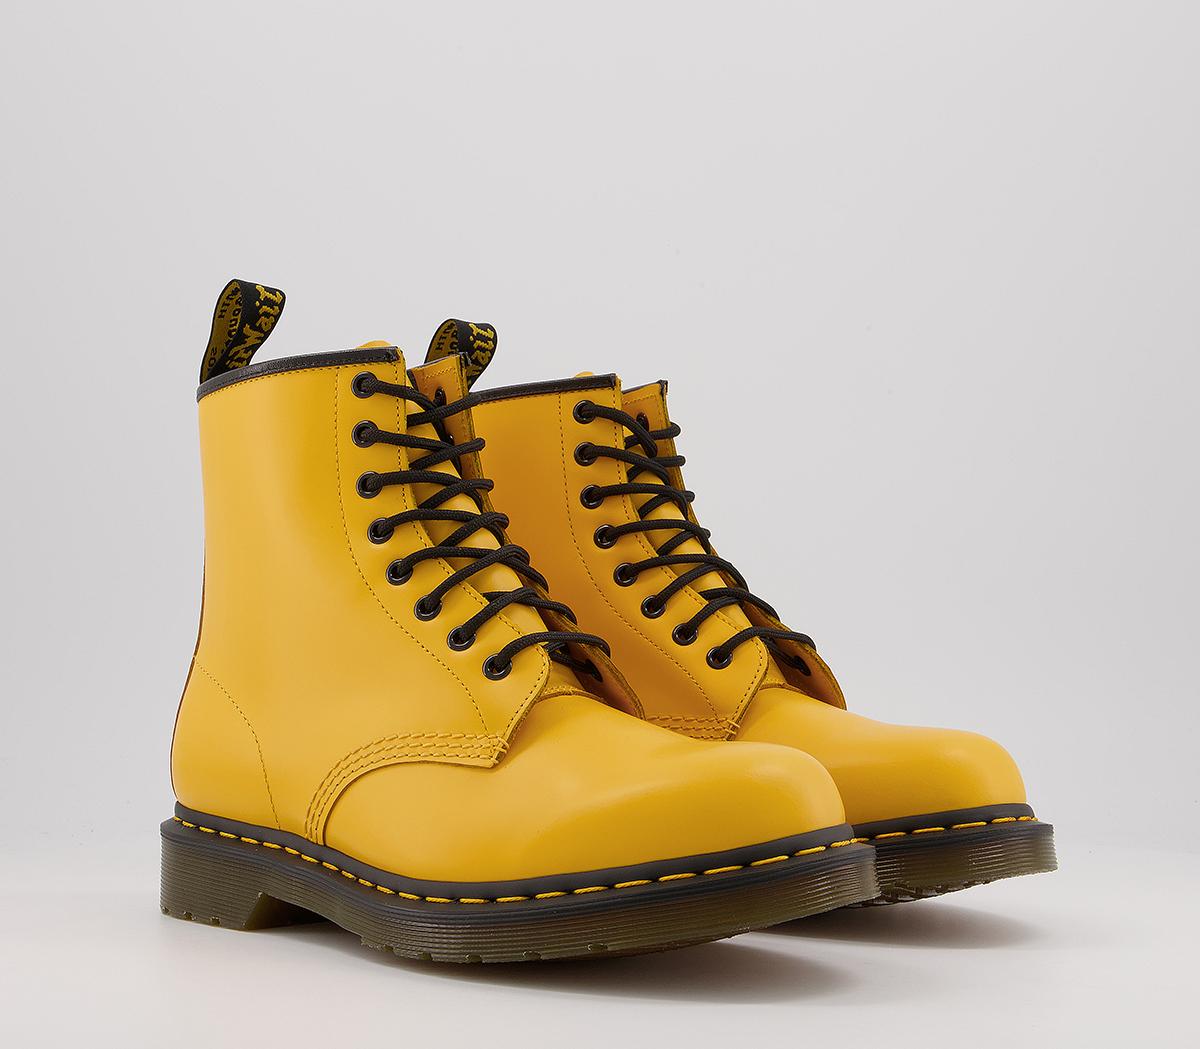 Dr. Martens 1460 8 Eye Boots Dms Yellow - Ankle Boots